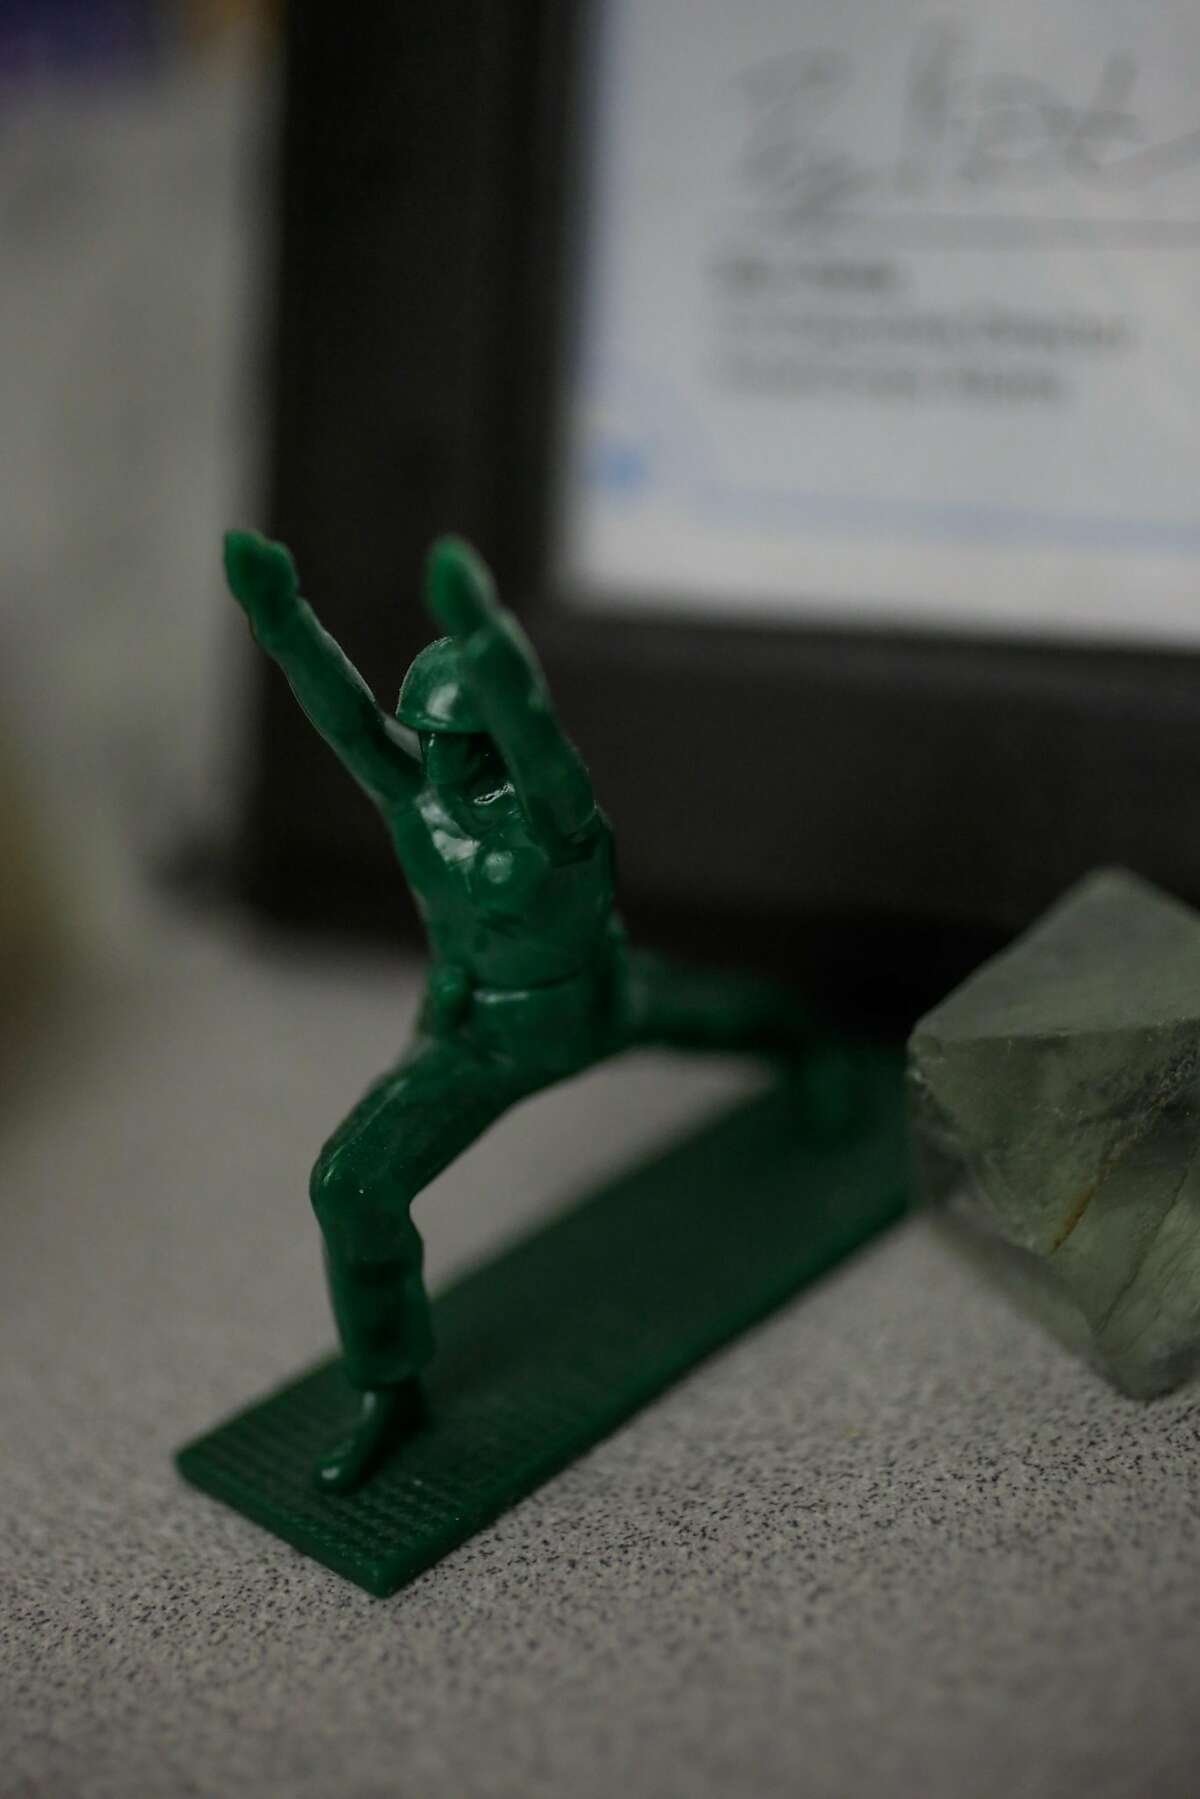 A "yoga joe" army statue sits on Kevin Miller's desk at Swords to Plowshares in San Francisco, Calif., on Monday, Nov. 6, 2017. Kevin Miller is a patient of the VA hospital and a veteran with post traumatic stress disorder, a traumatic brain injury and an injury in his neck from an accident while on tour.